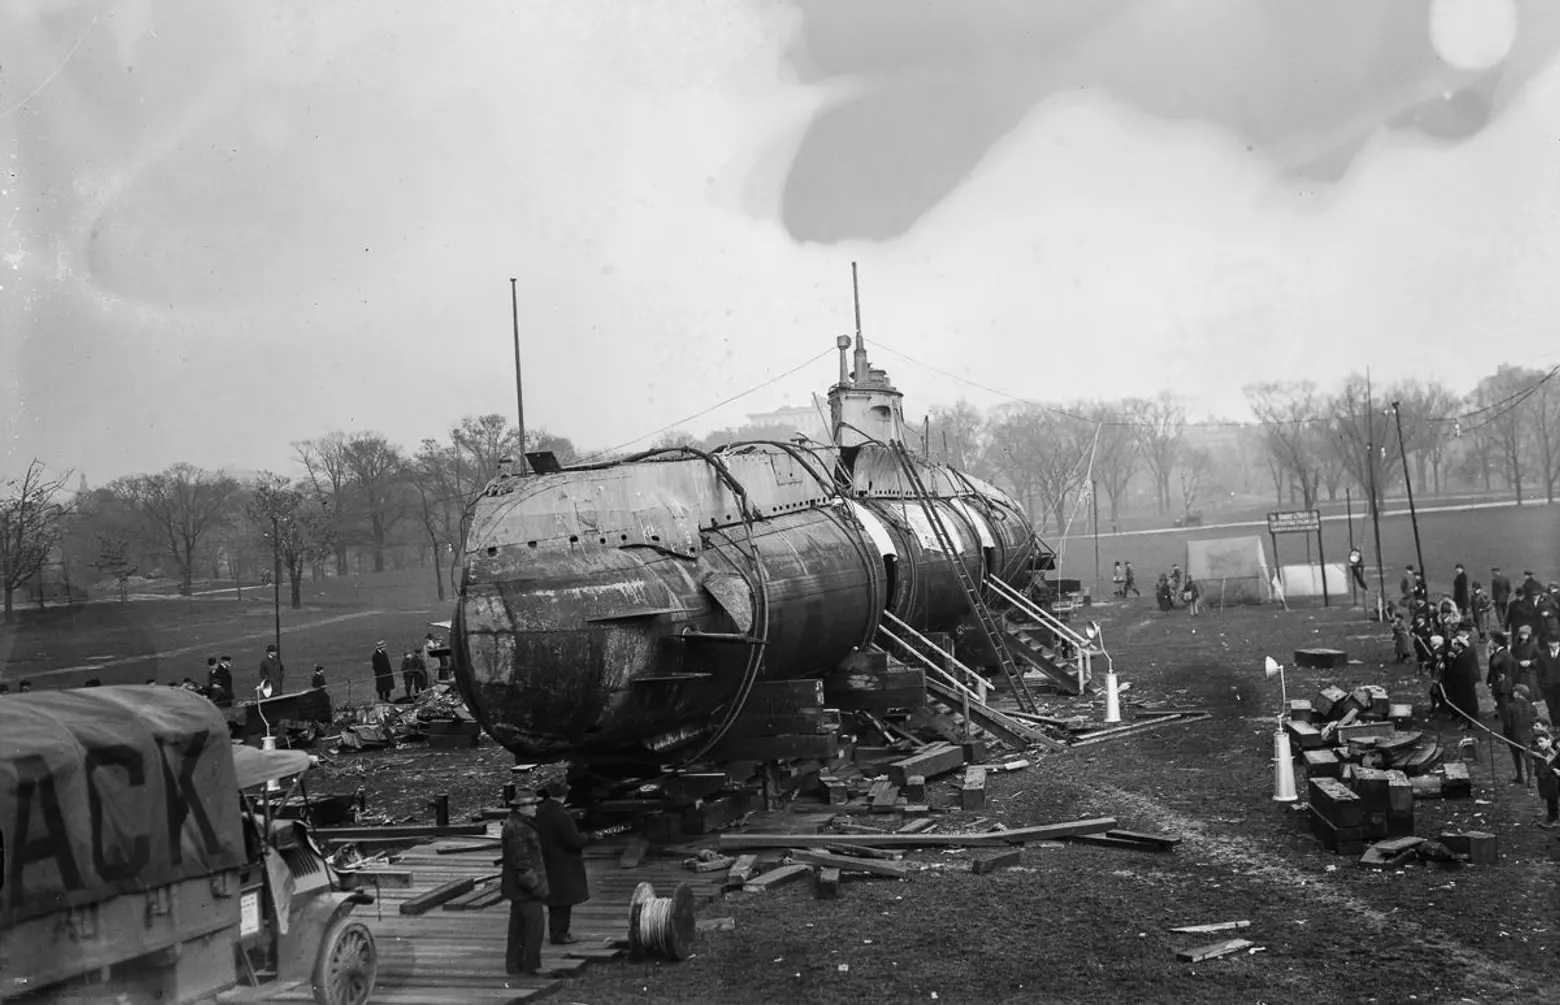 In 1917, a German U-Boat submarine ended up in Central Park